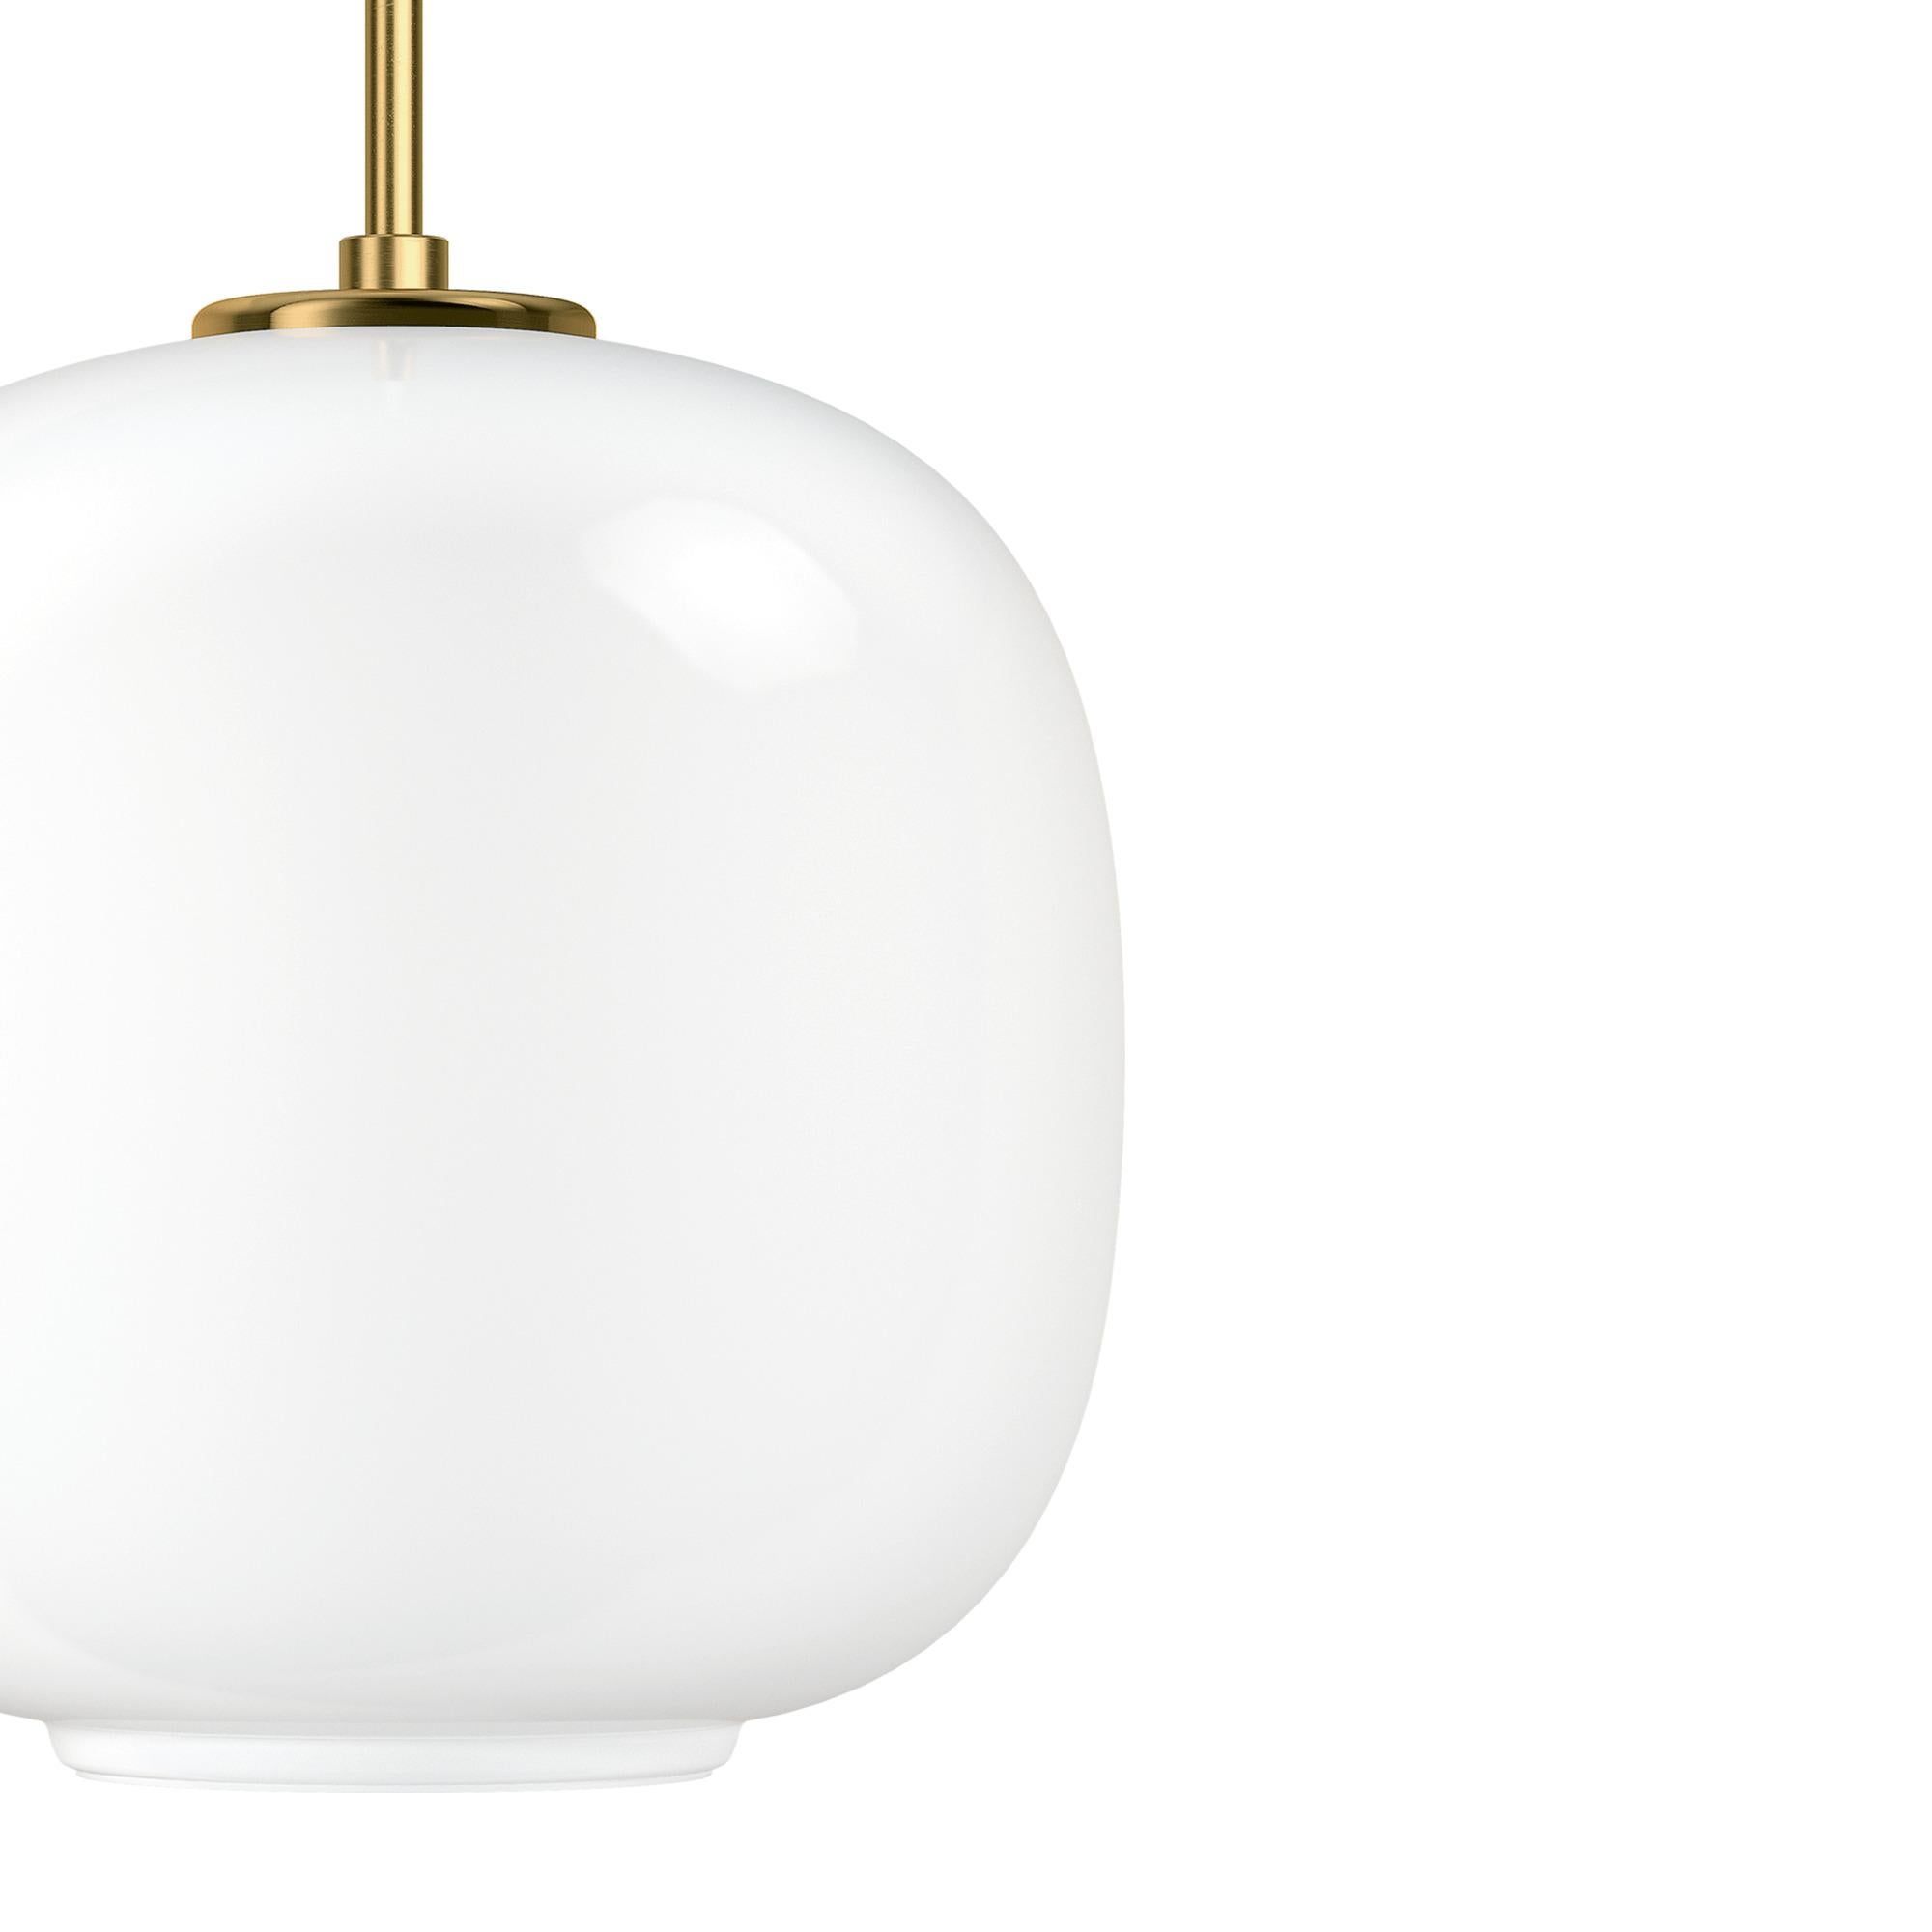 Small Vilhelm Lauritzen VL45 'Radiohouse' pendant for Louis Poulsen. Executed in thick hand blown glossy white opal glass, brushed brass pendant tube, white metal canopy and vinyl cord. Uses one standard e12 US candelabra bulb. This is the smallest